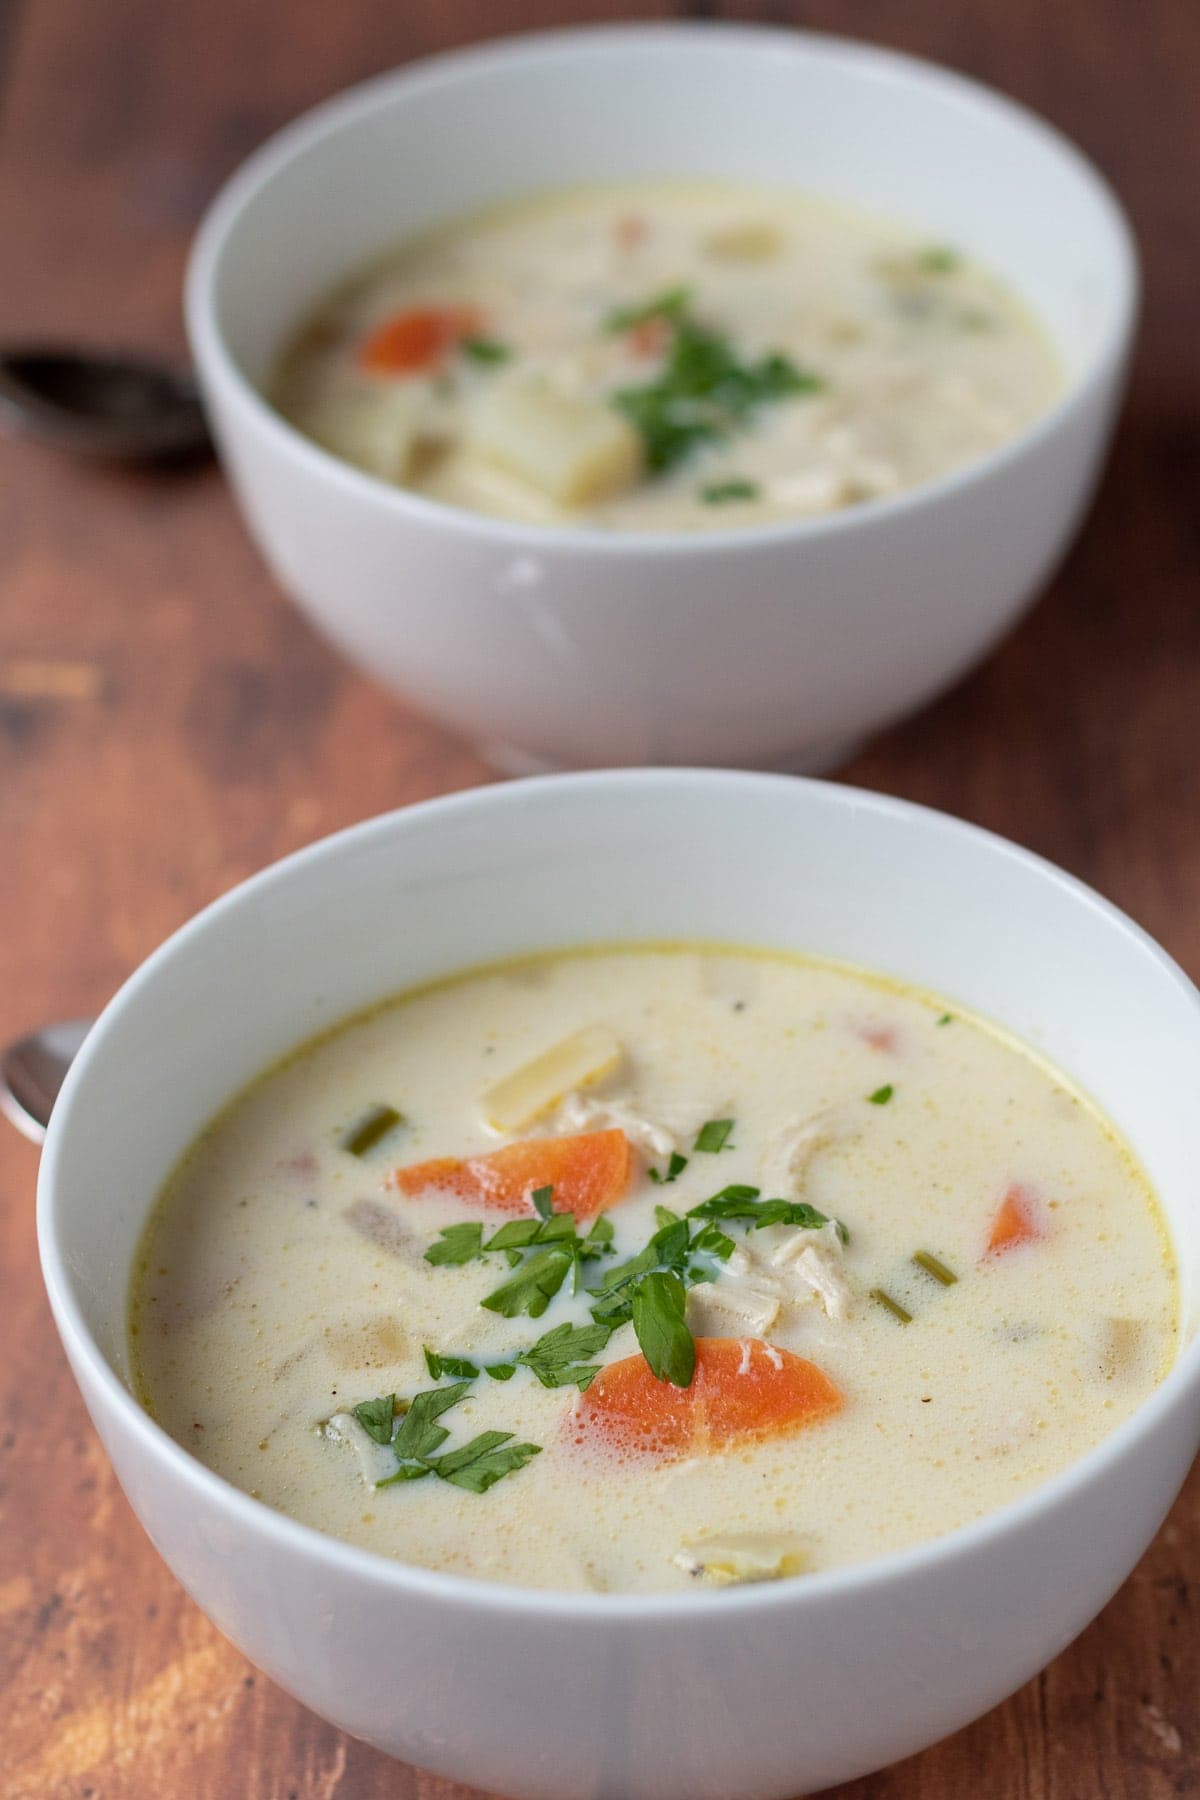 Two bowls of creamy chicken potato soup one in front of the other.